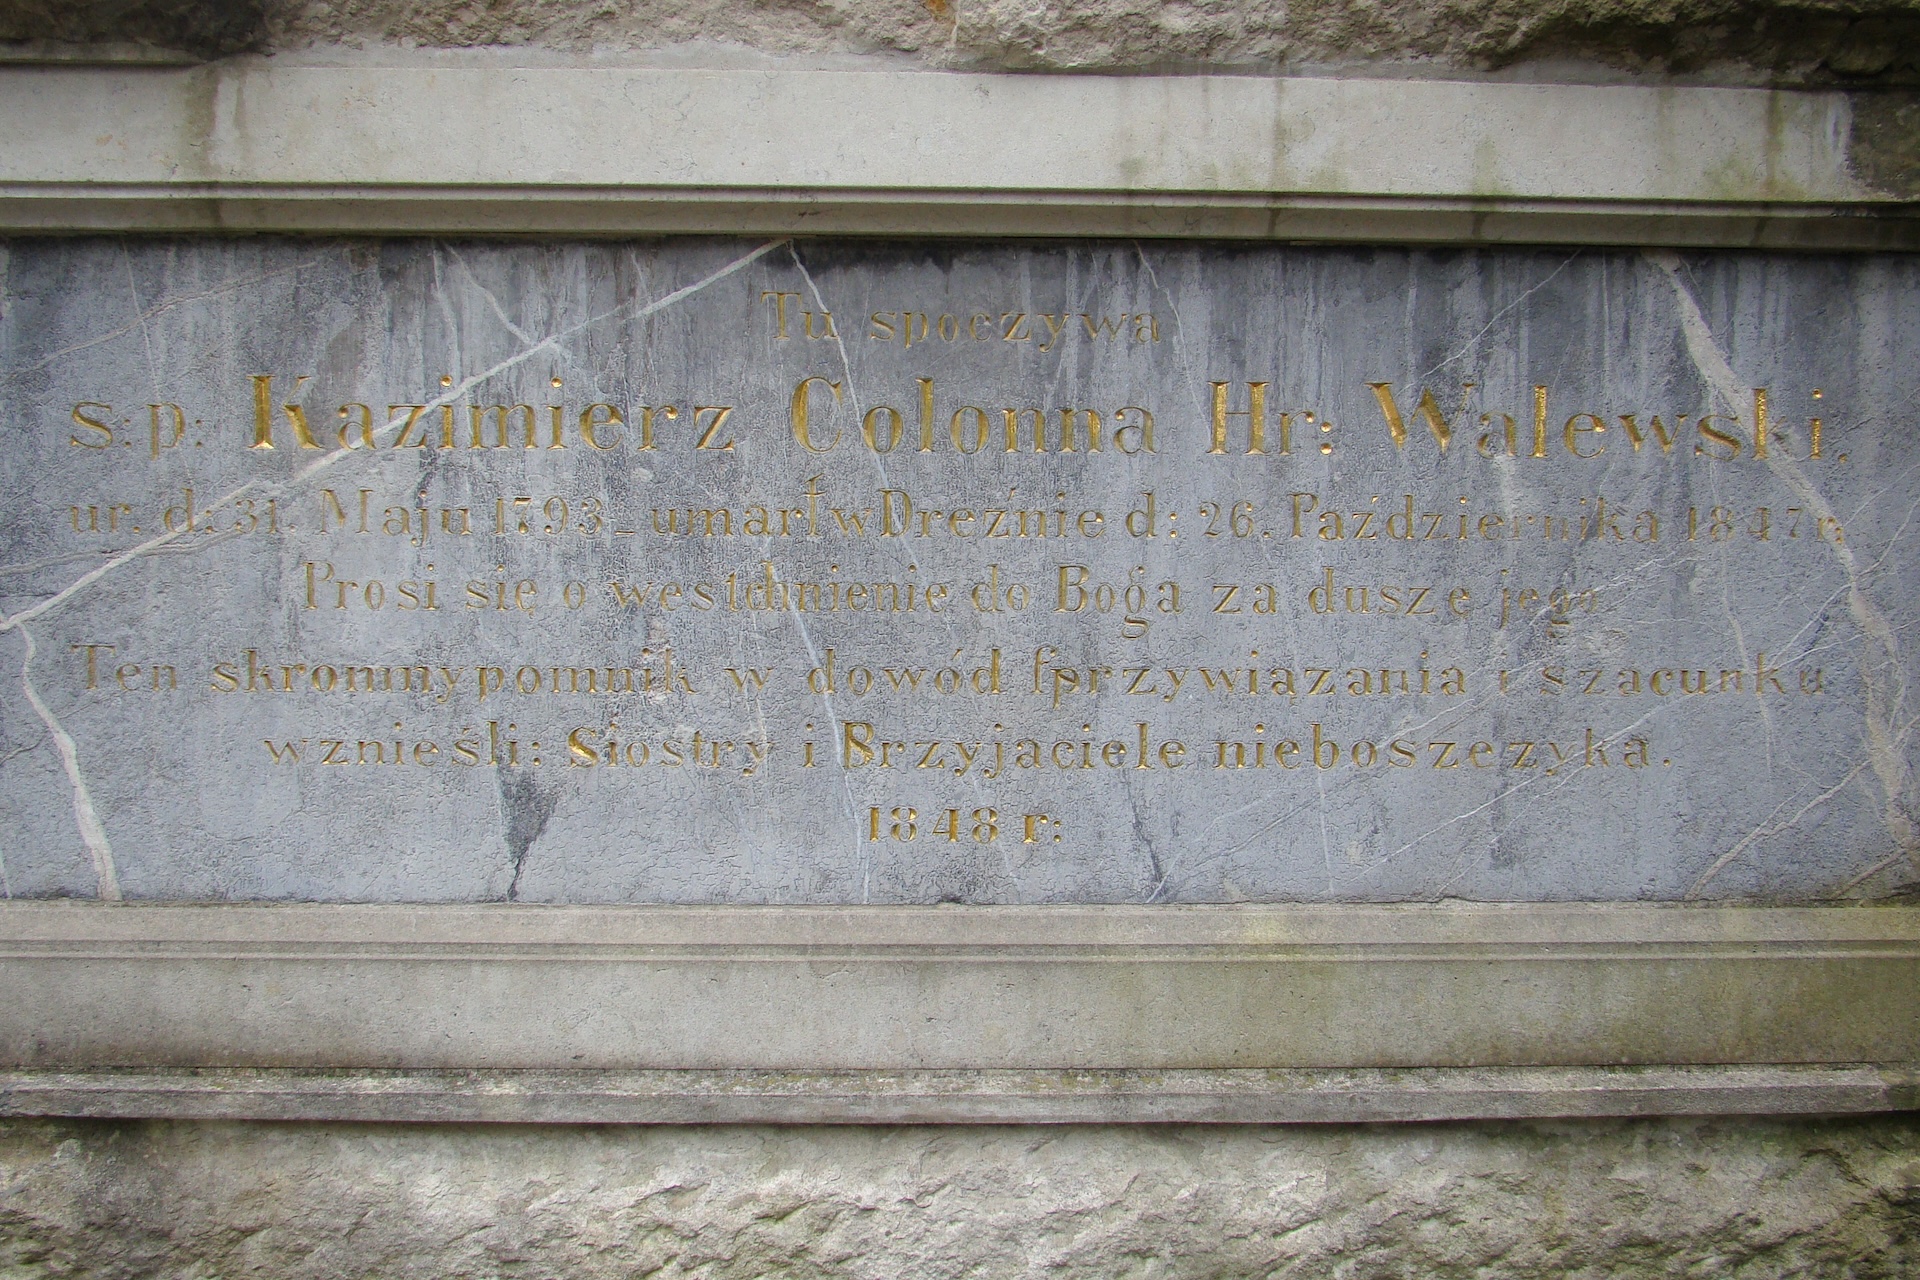 Inscription on the tombstone of Casimir Colonna-Walewski in the old Catholic cemetery in Dresden